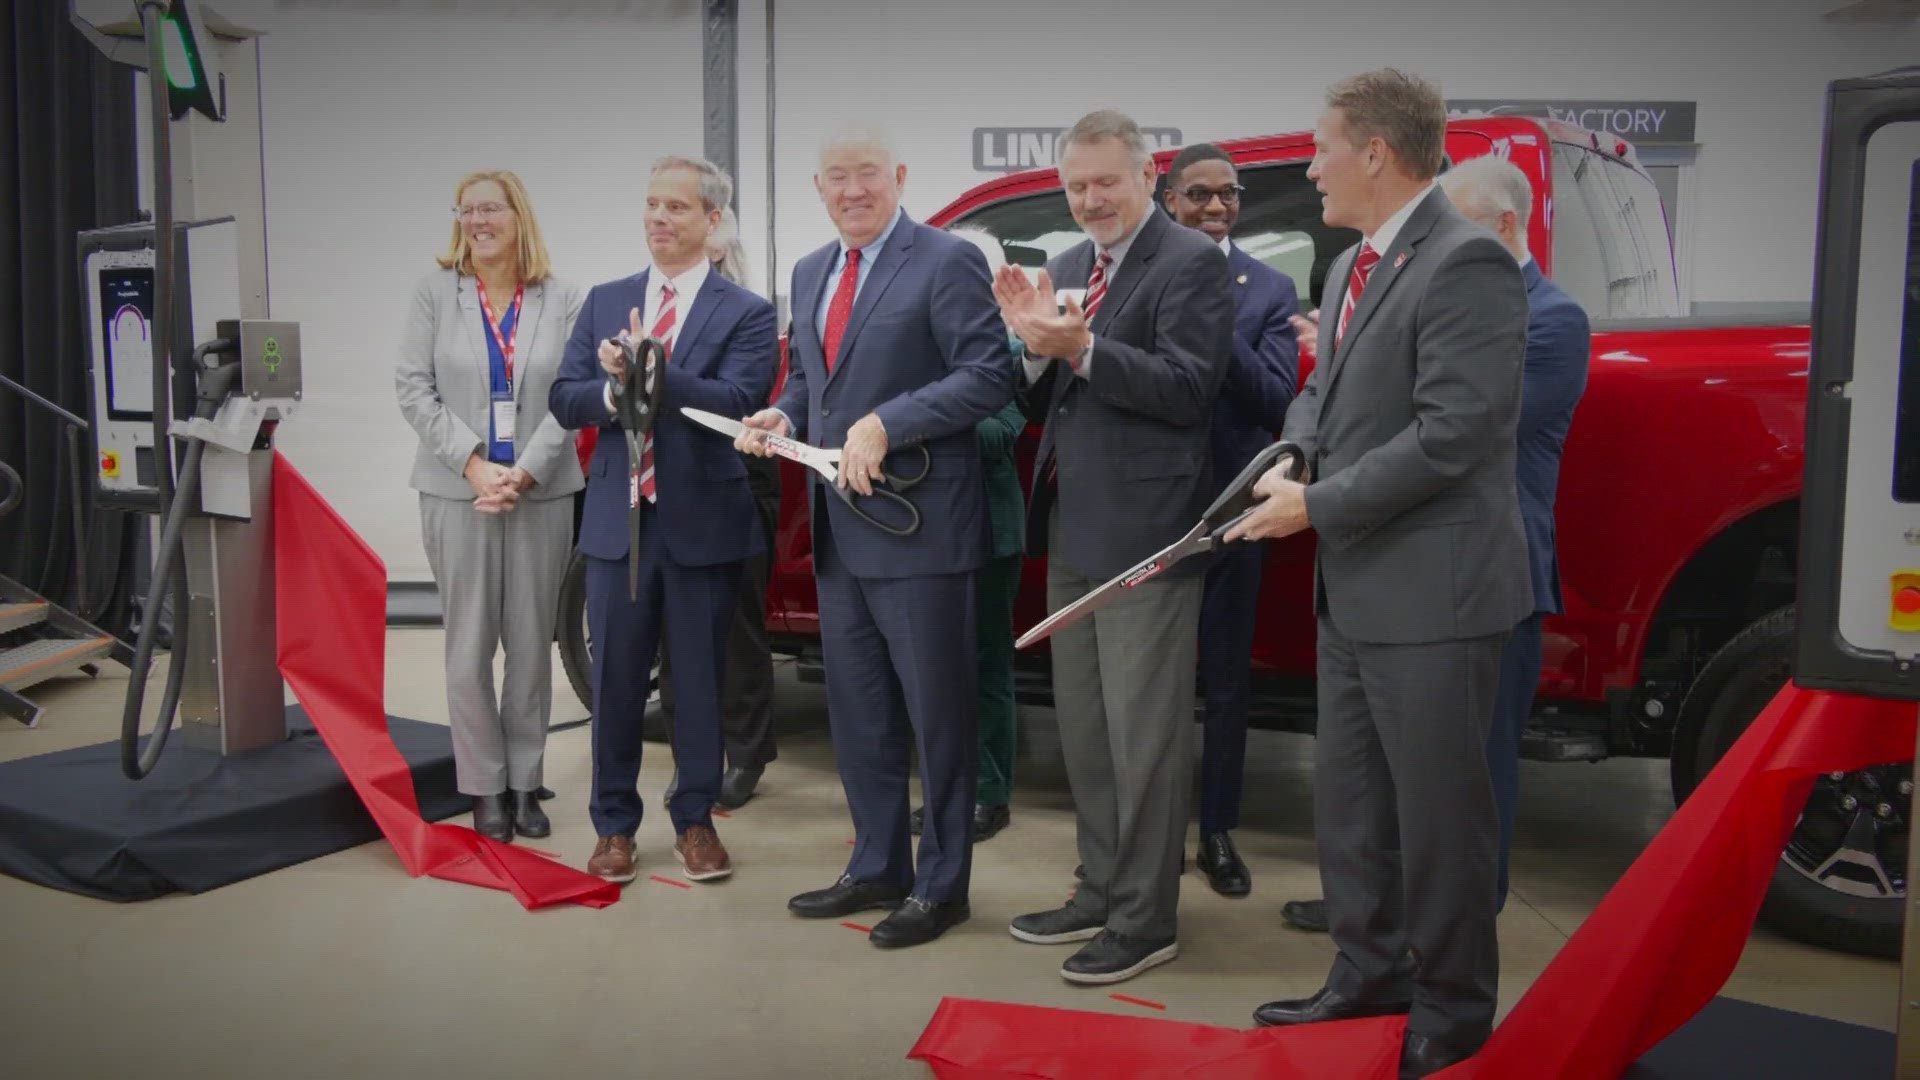 You've probably seen them on the roads or maybe you know someone who drives one, electric vehicles. Lincoln Electric had a big launch today about EV.